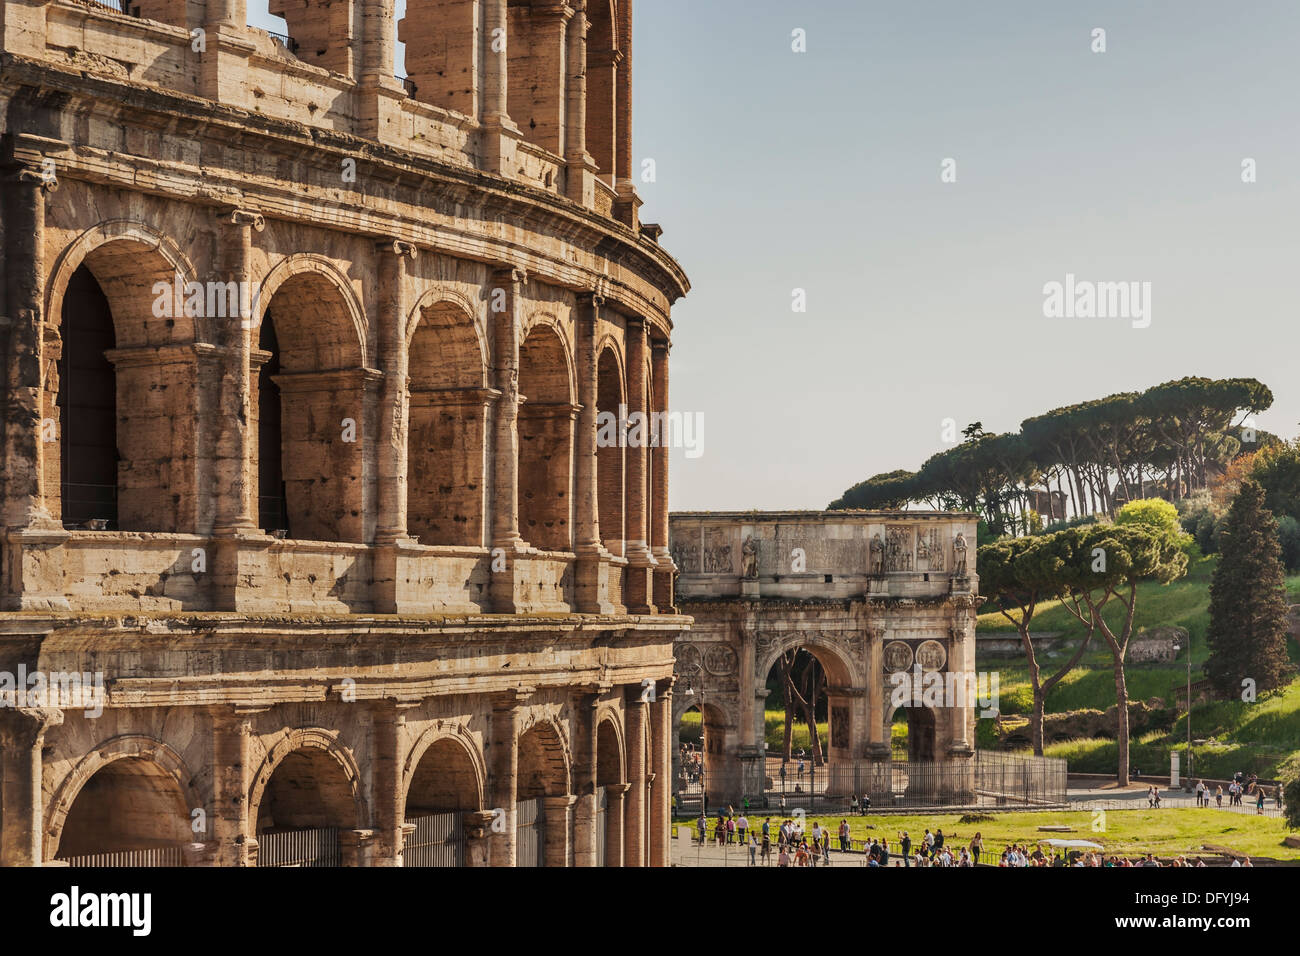 The Colosseum is the largest amphitheater built in ancient Rome from 72 to 80 AD, Rome, Lazio, Italy, Europe Stock Photo